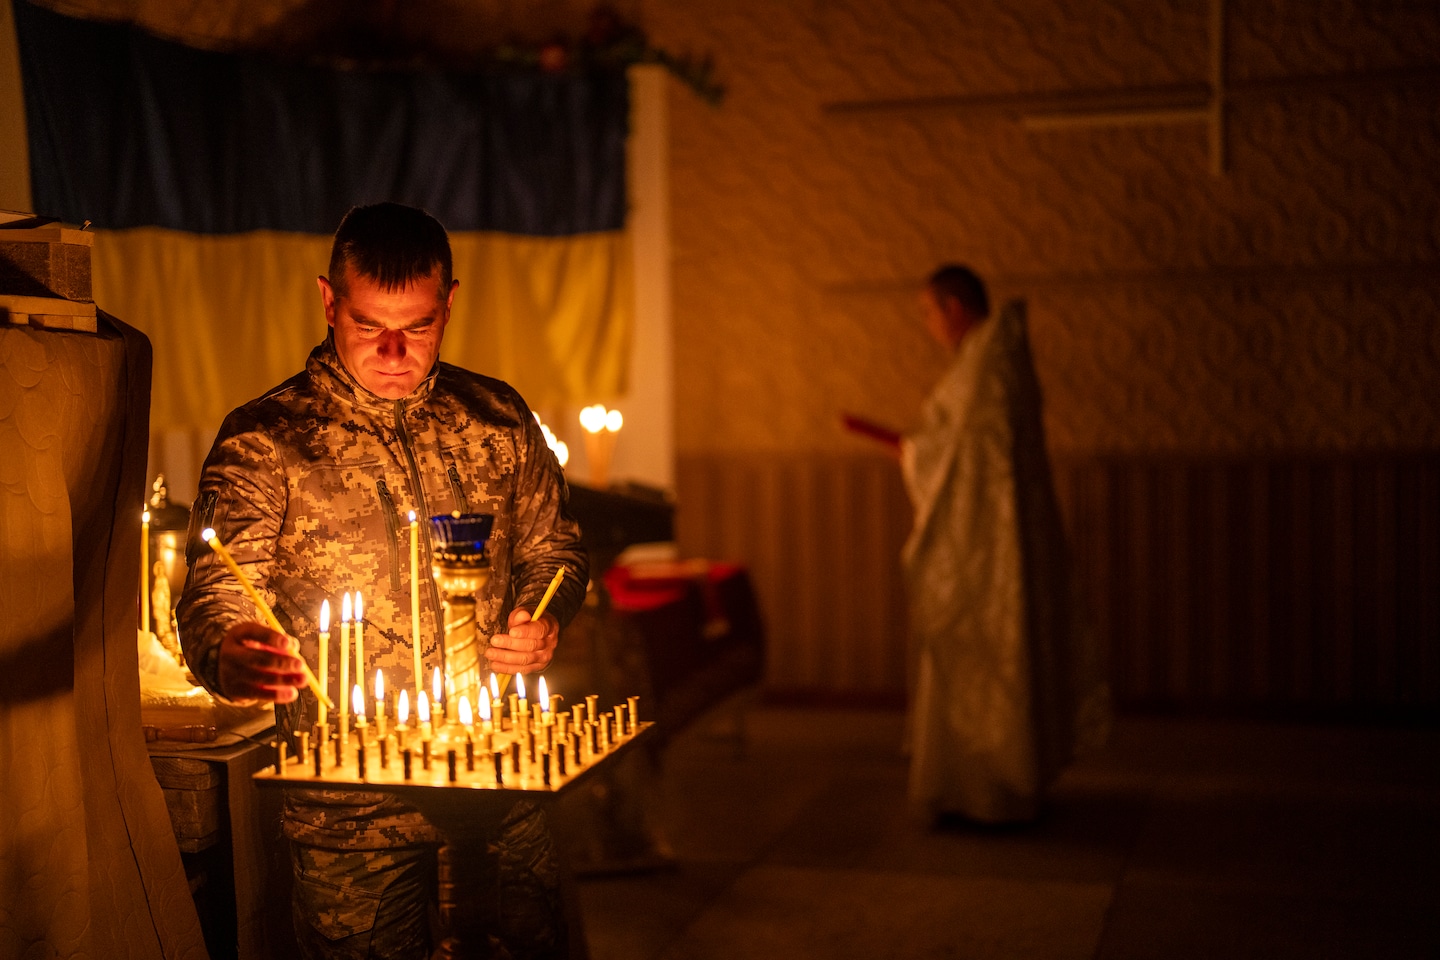 Ukraine marks its third Easter at war under fire from Russian drones - The Washington Post